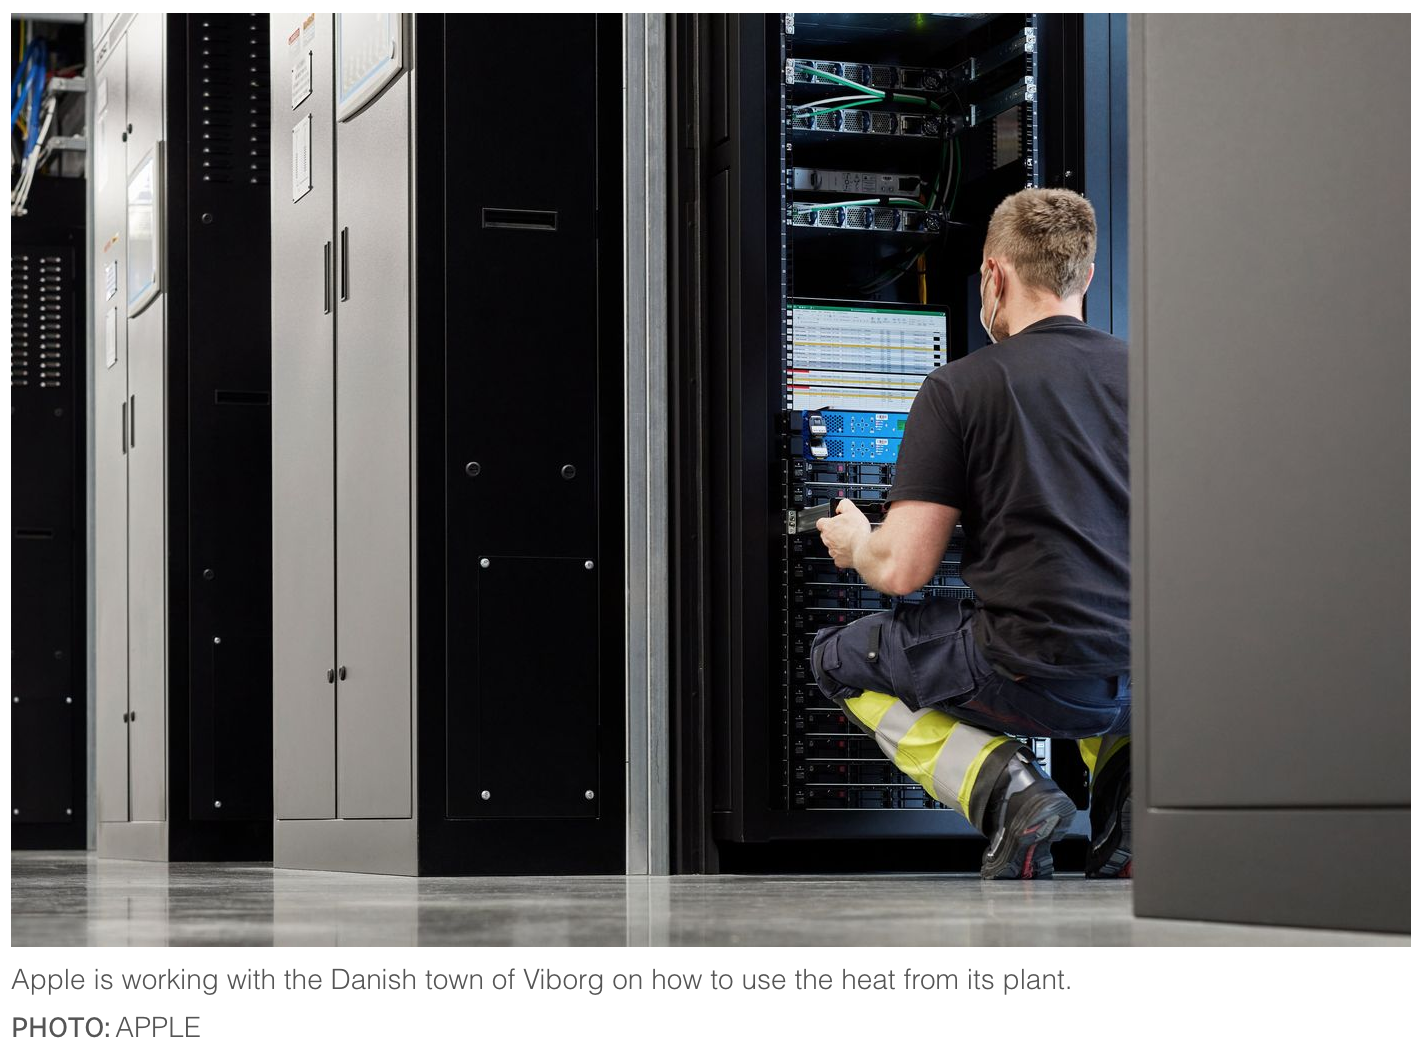 If Europe Can Tap Hi-Tech Industry’s Power-Hungry Data Centers To Heat Homes Then Why Not Use Bitcoin Miners As Well?